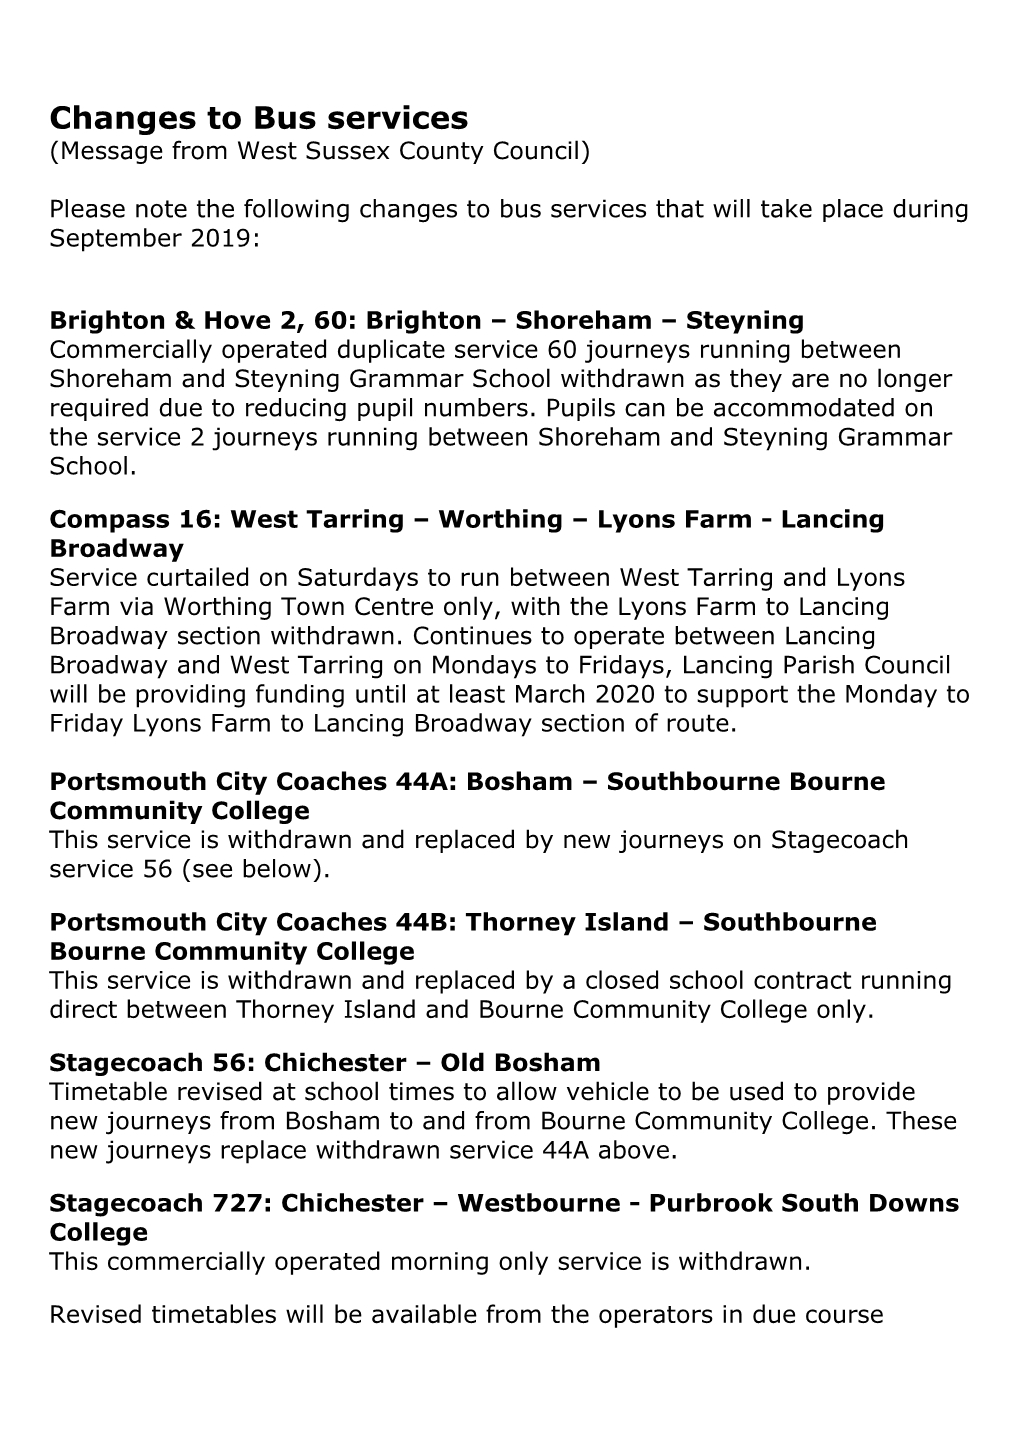 Changes to Bus Services (Message from West Sussex County Council)